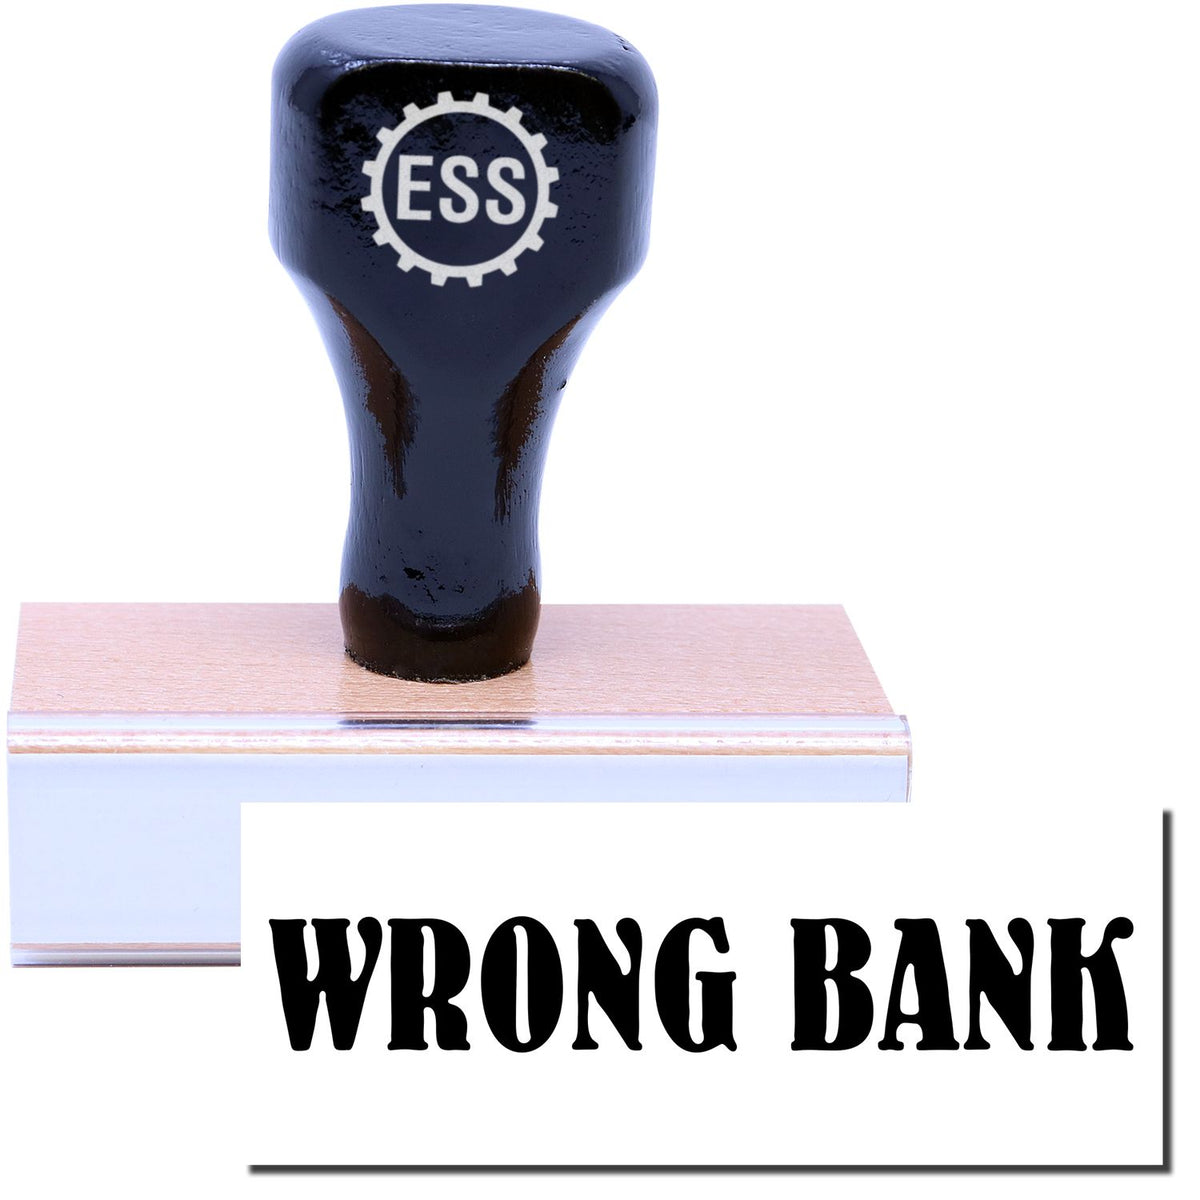 A stock office rubber stamp with a stamped image showing how the text &quot;WRONG BANK&quot; is displayed after stamping.